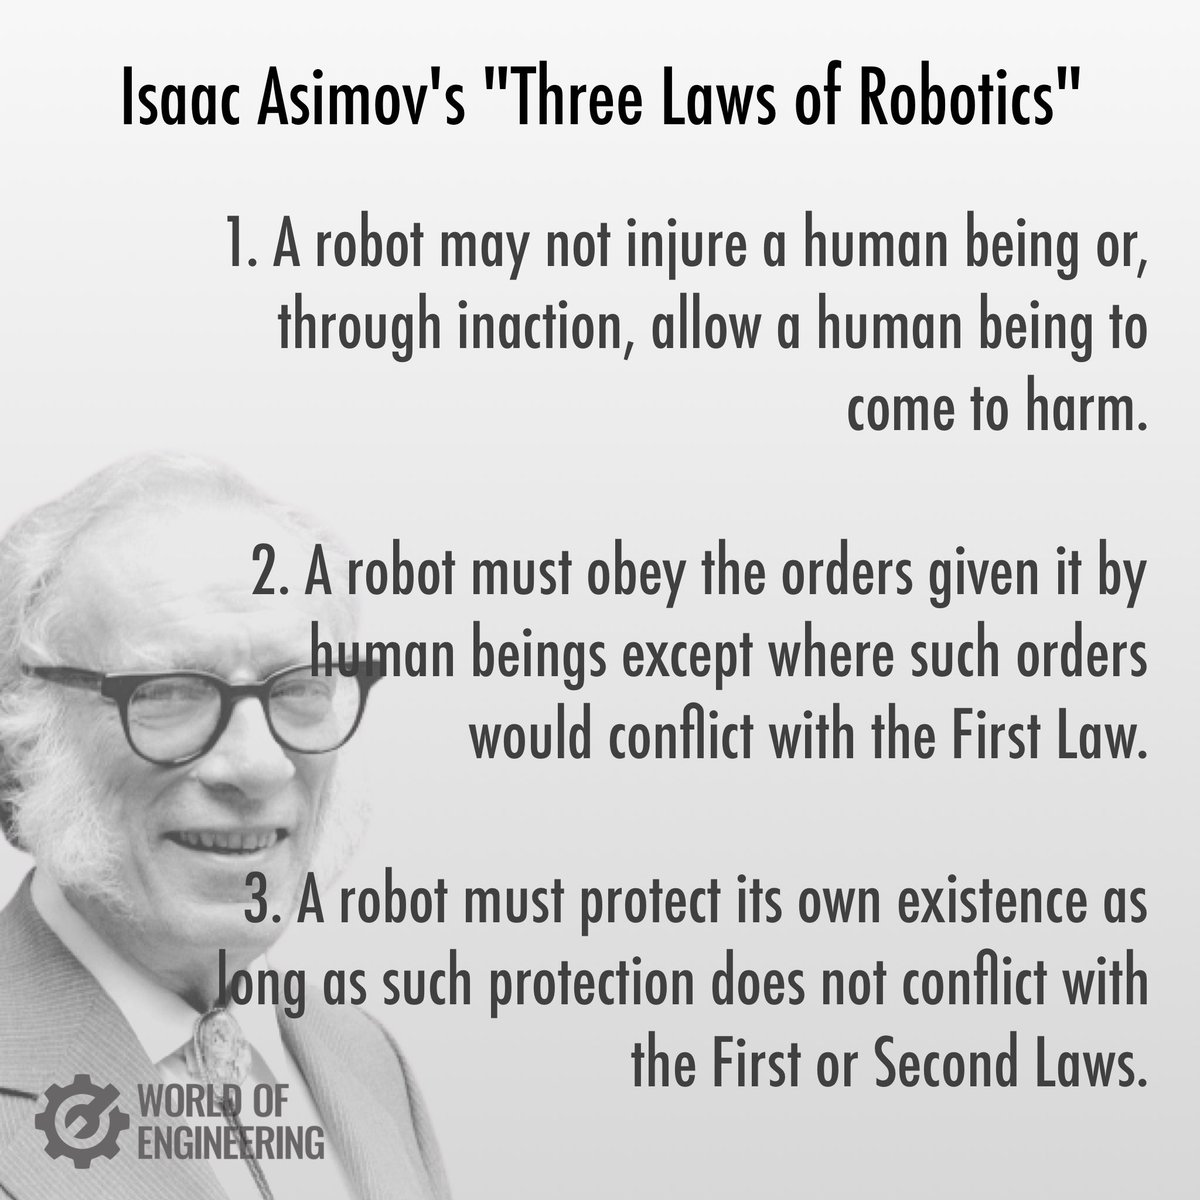 of Engineering on Twitter: "Isaac Asimov's “Three Laws of https://t.co/OmJQCeUkwK" / Twitter